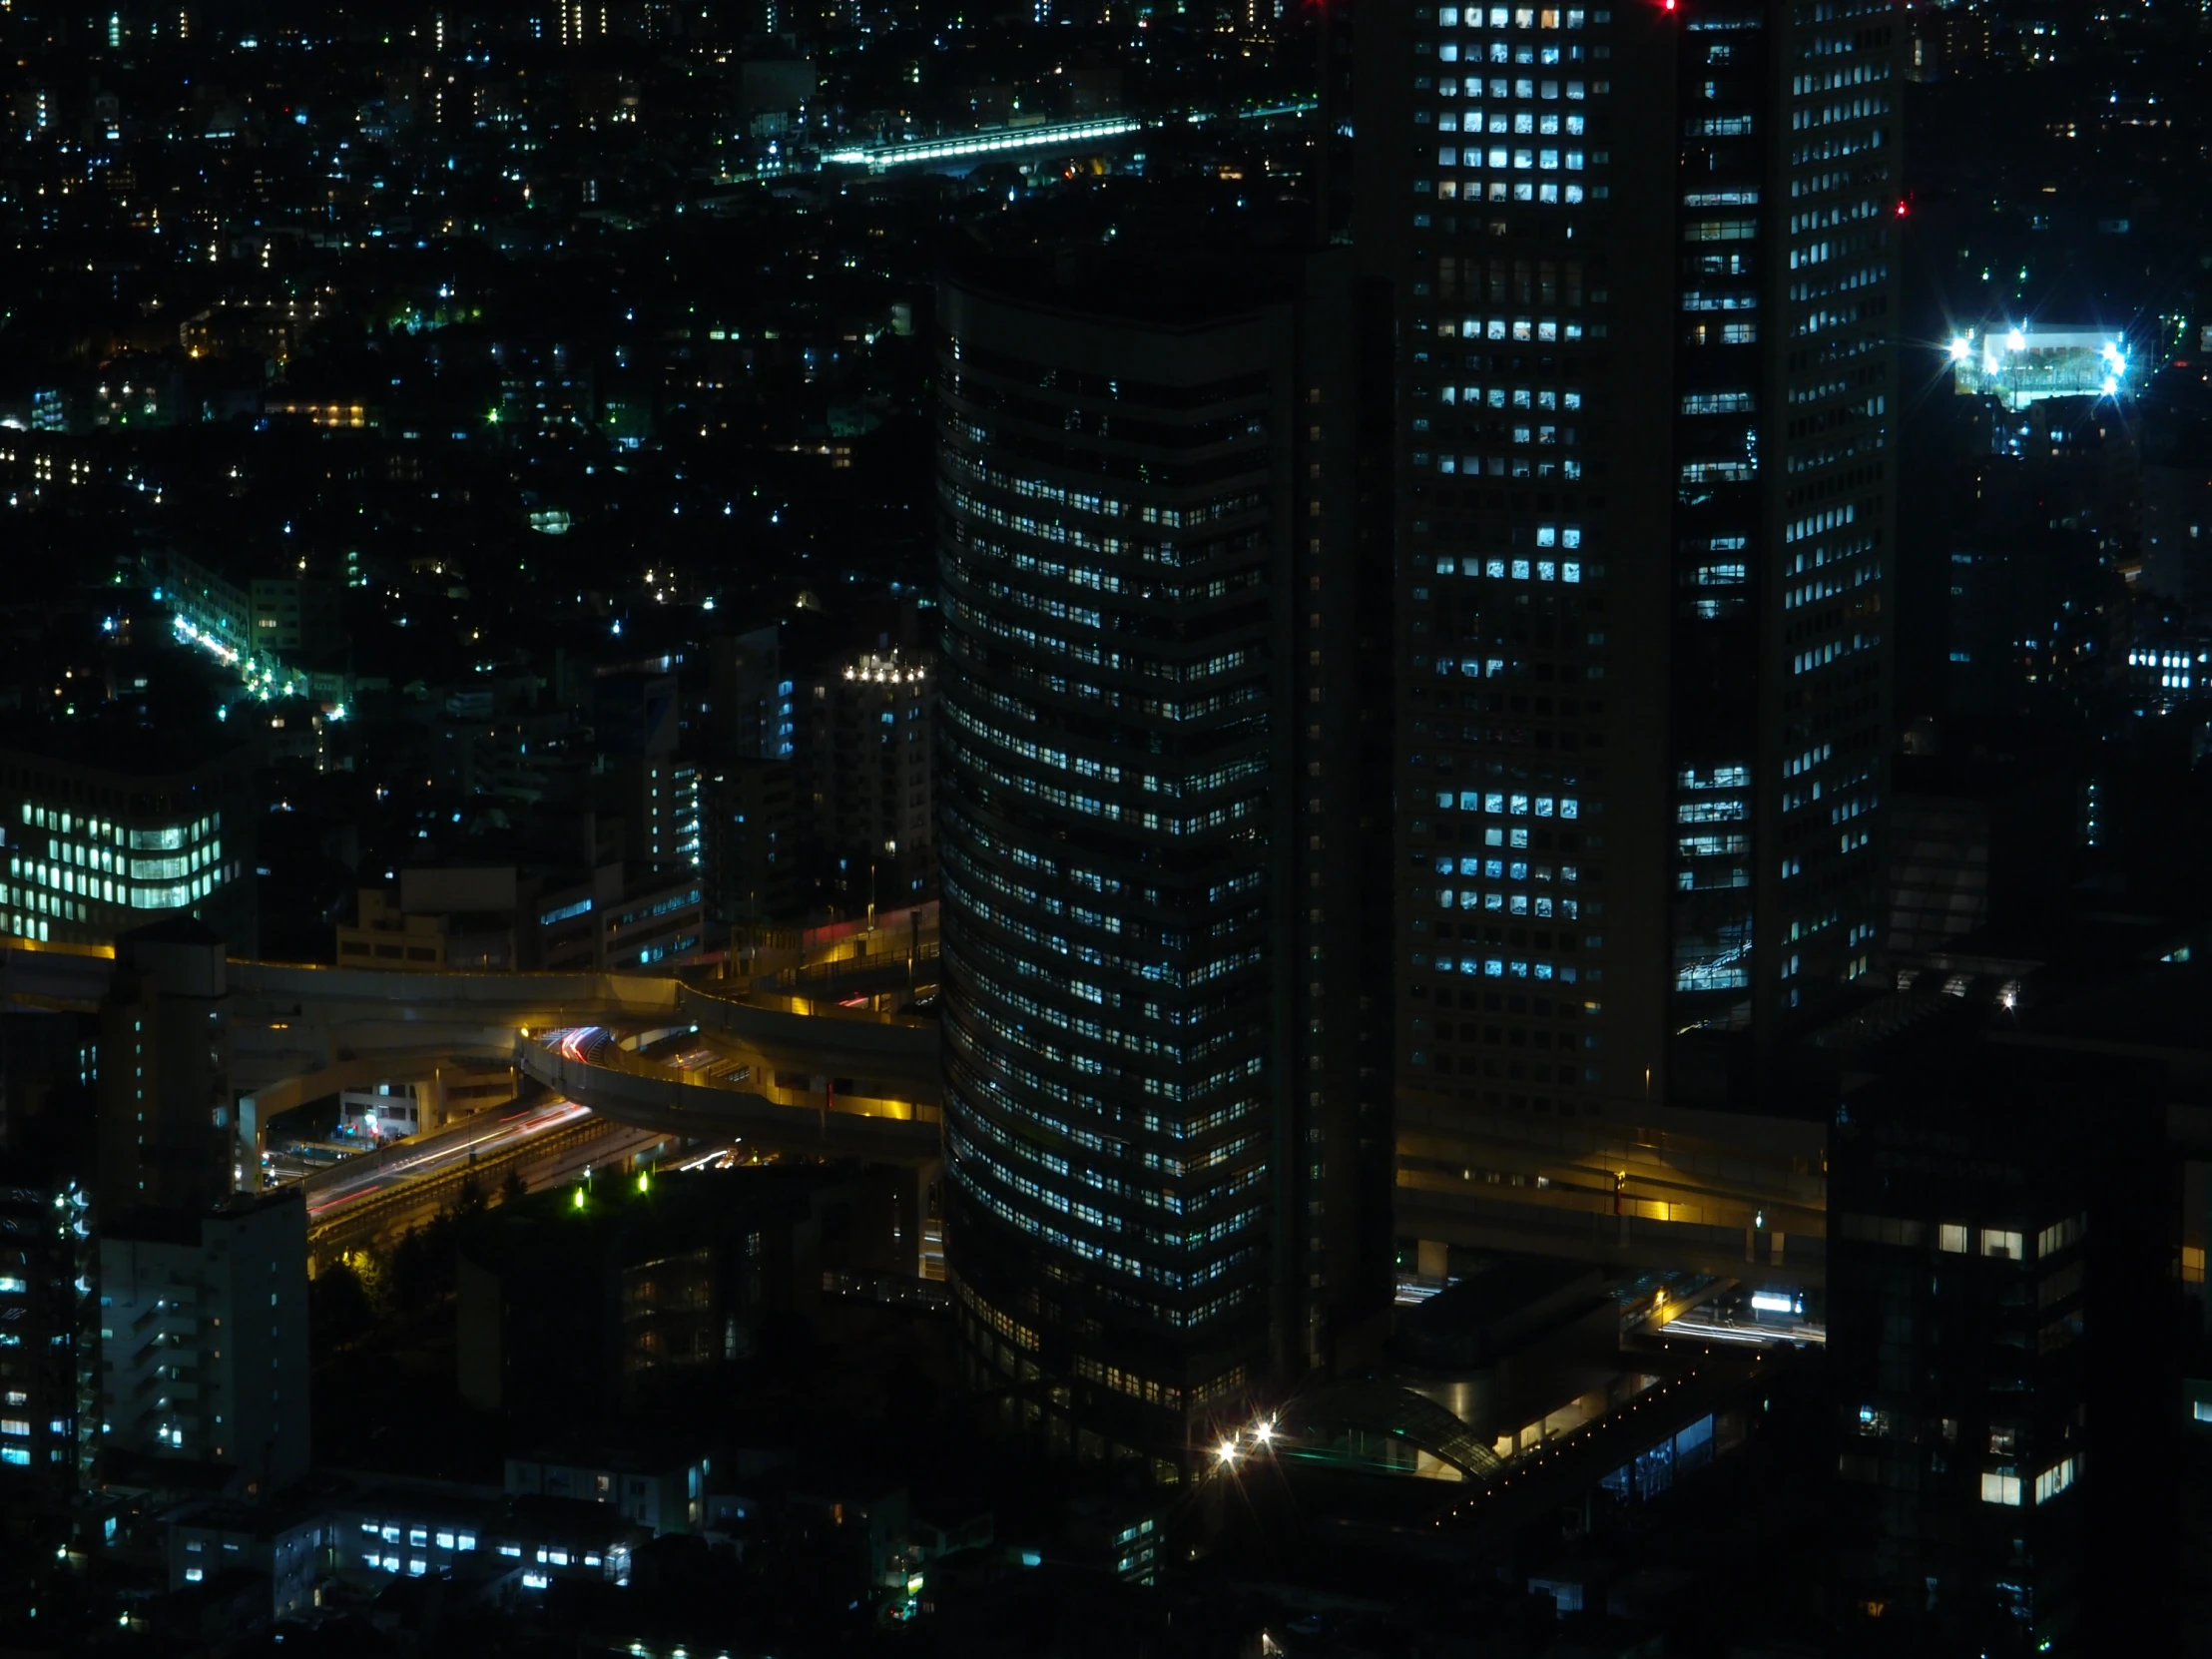 some buildings are shown at night in the city